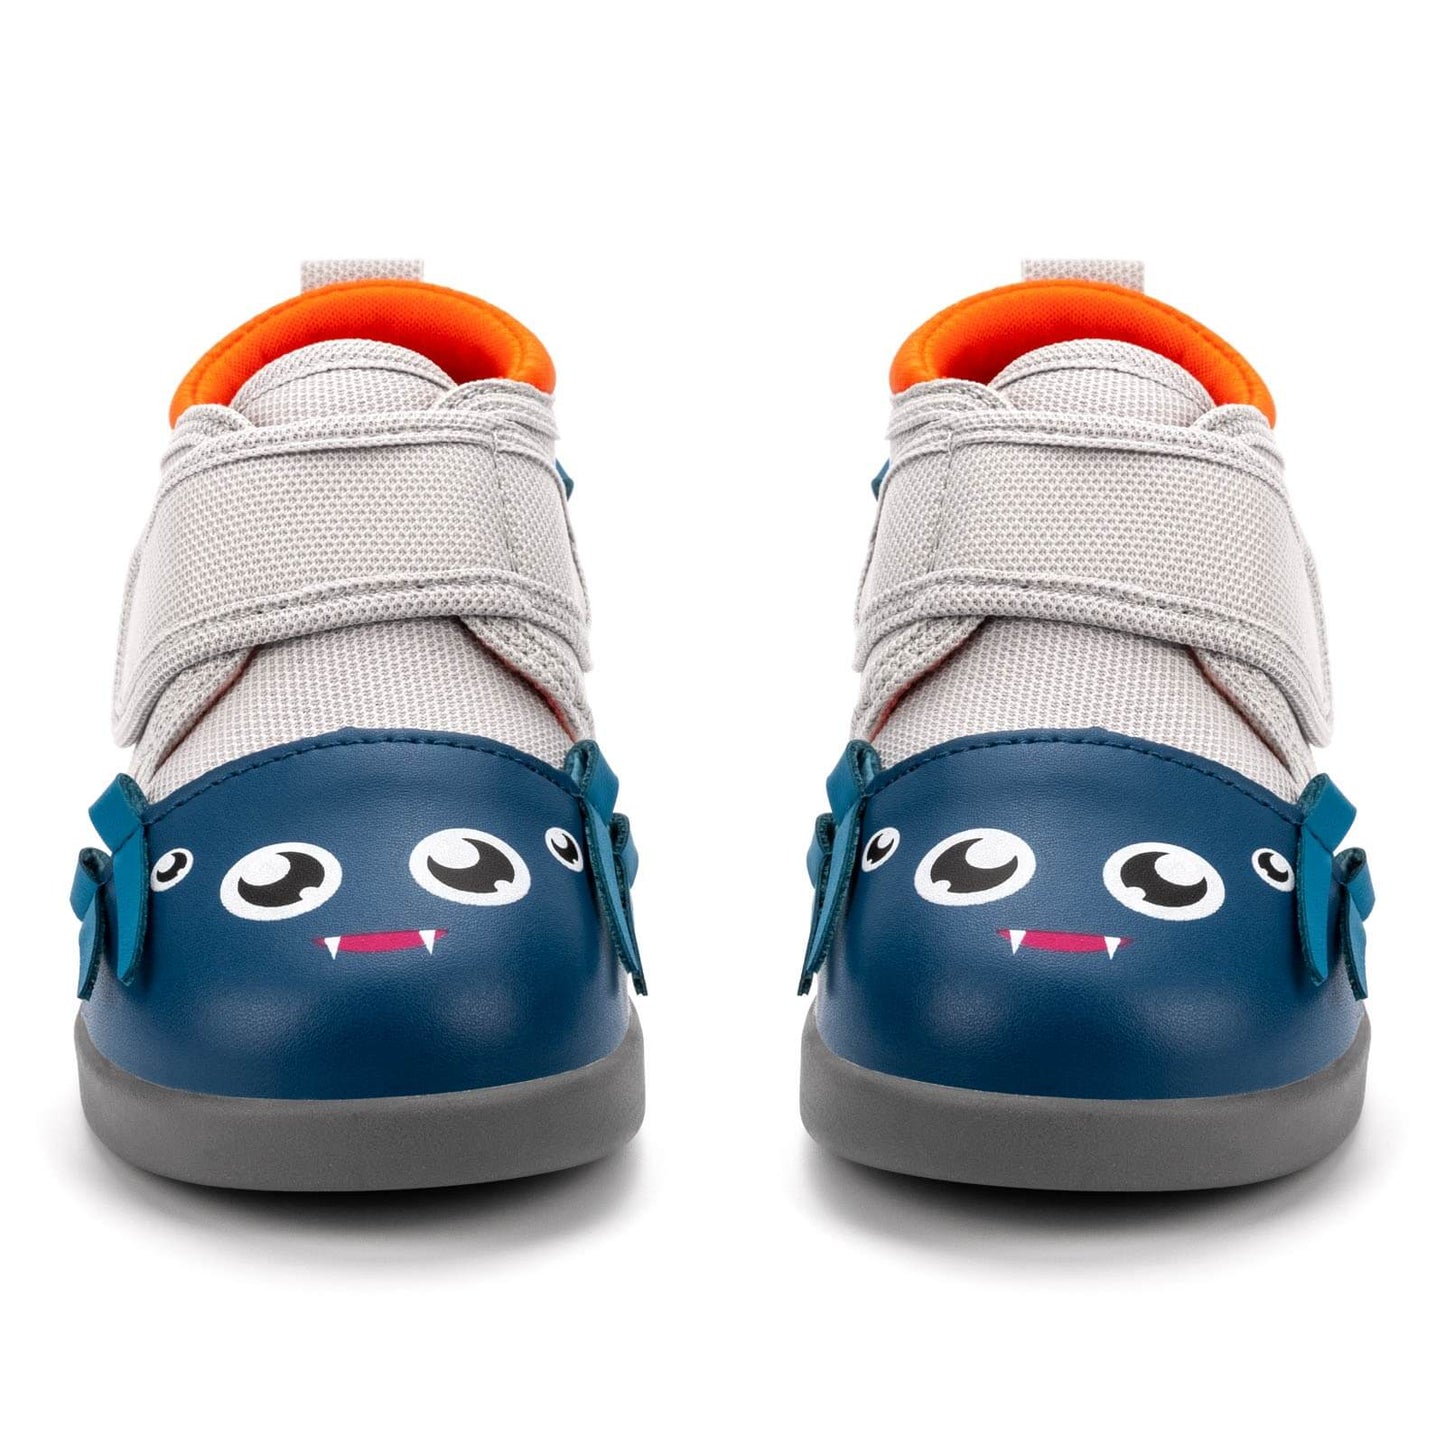 ikiki Squeaky Shoes for Toddlers with On/Off Squeaker Switch